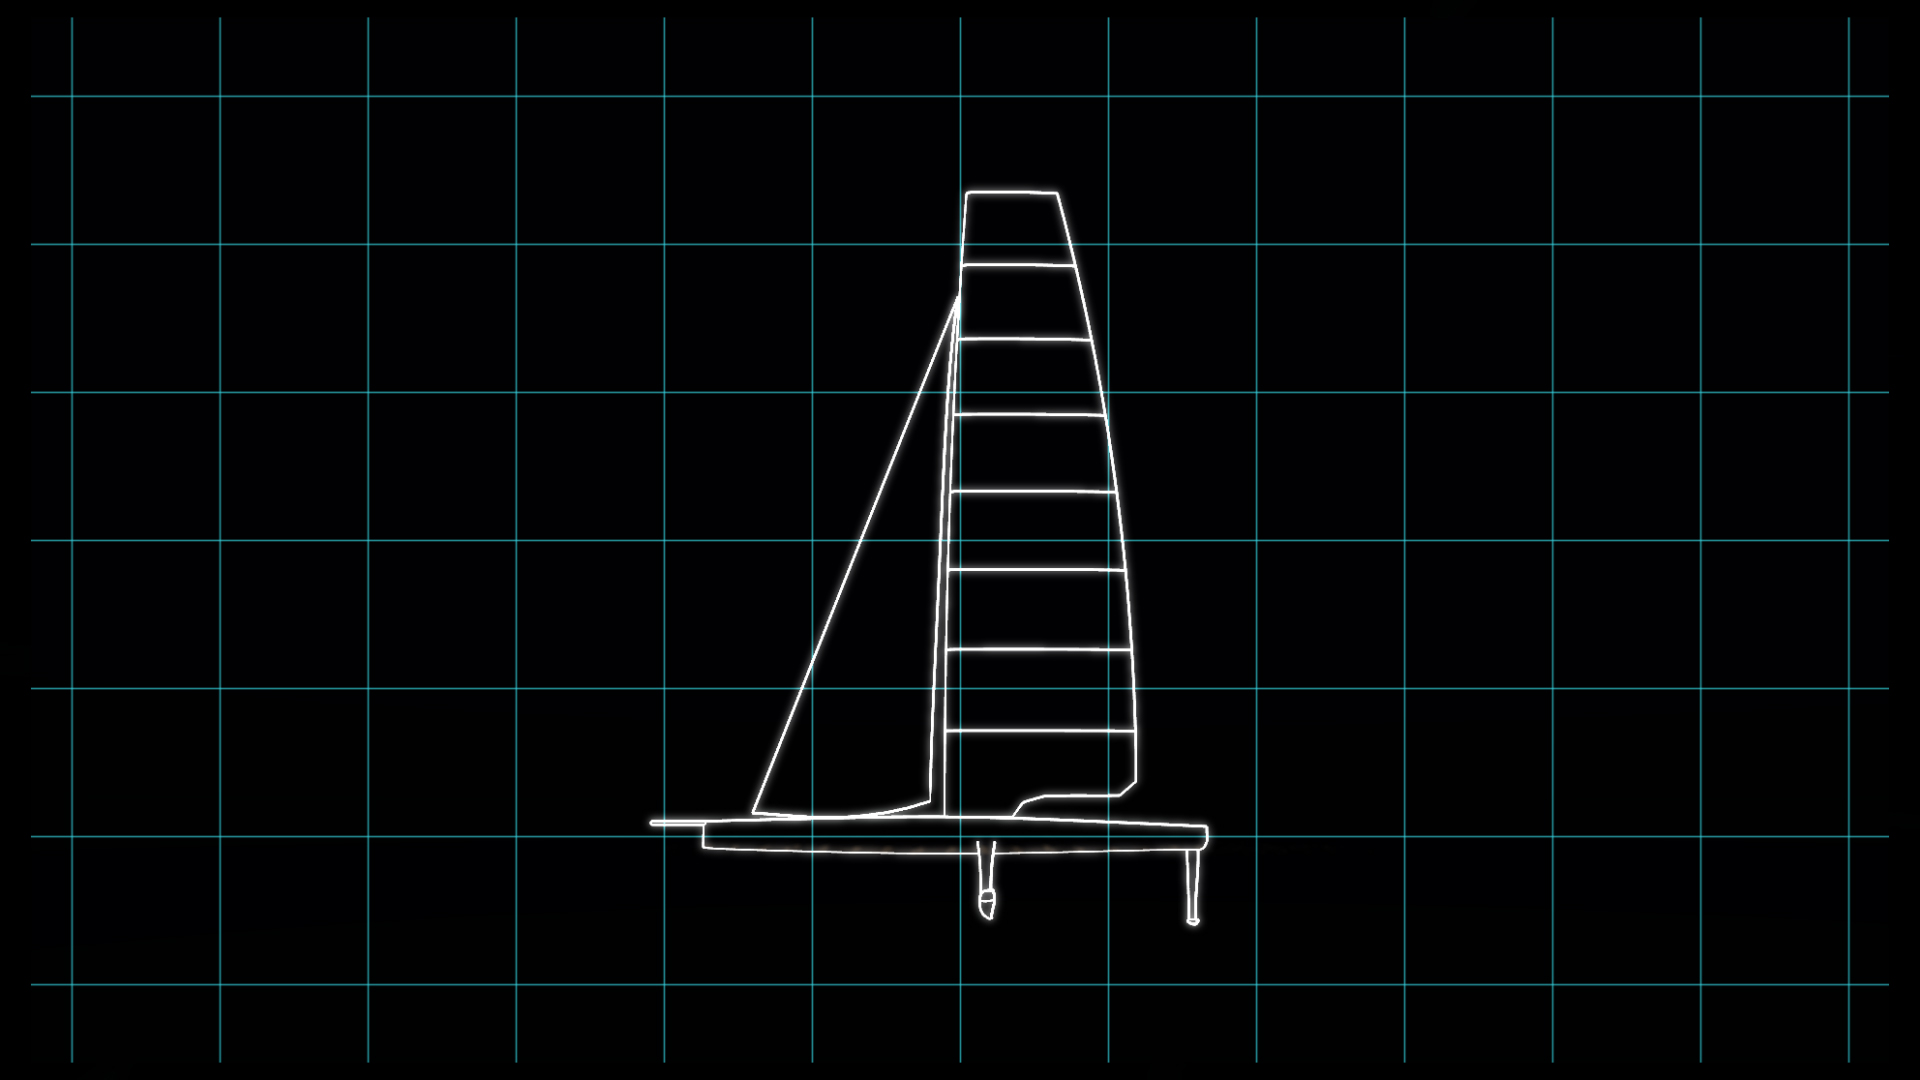 The concept for the AC75, the class of boat to be sailed in the 36th America’s Cup 2021 in Auckland / New Zealand